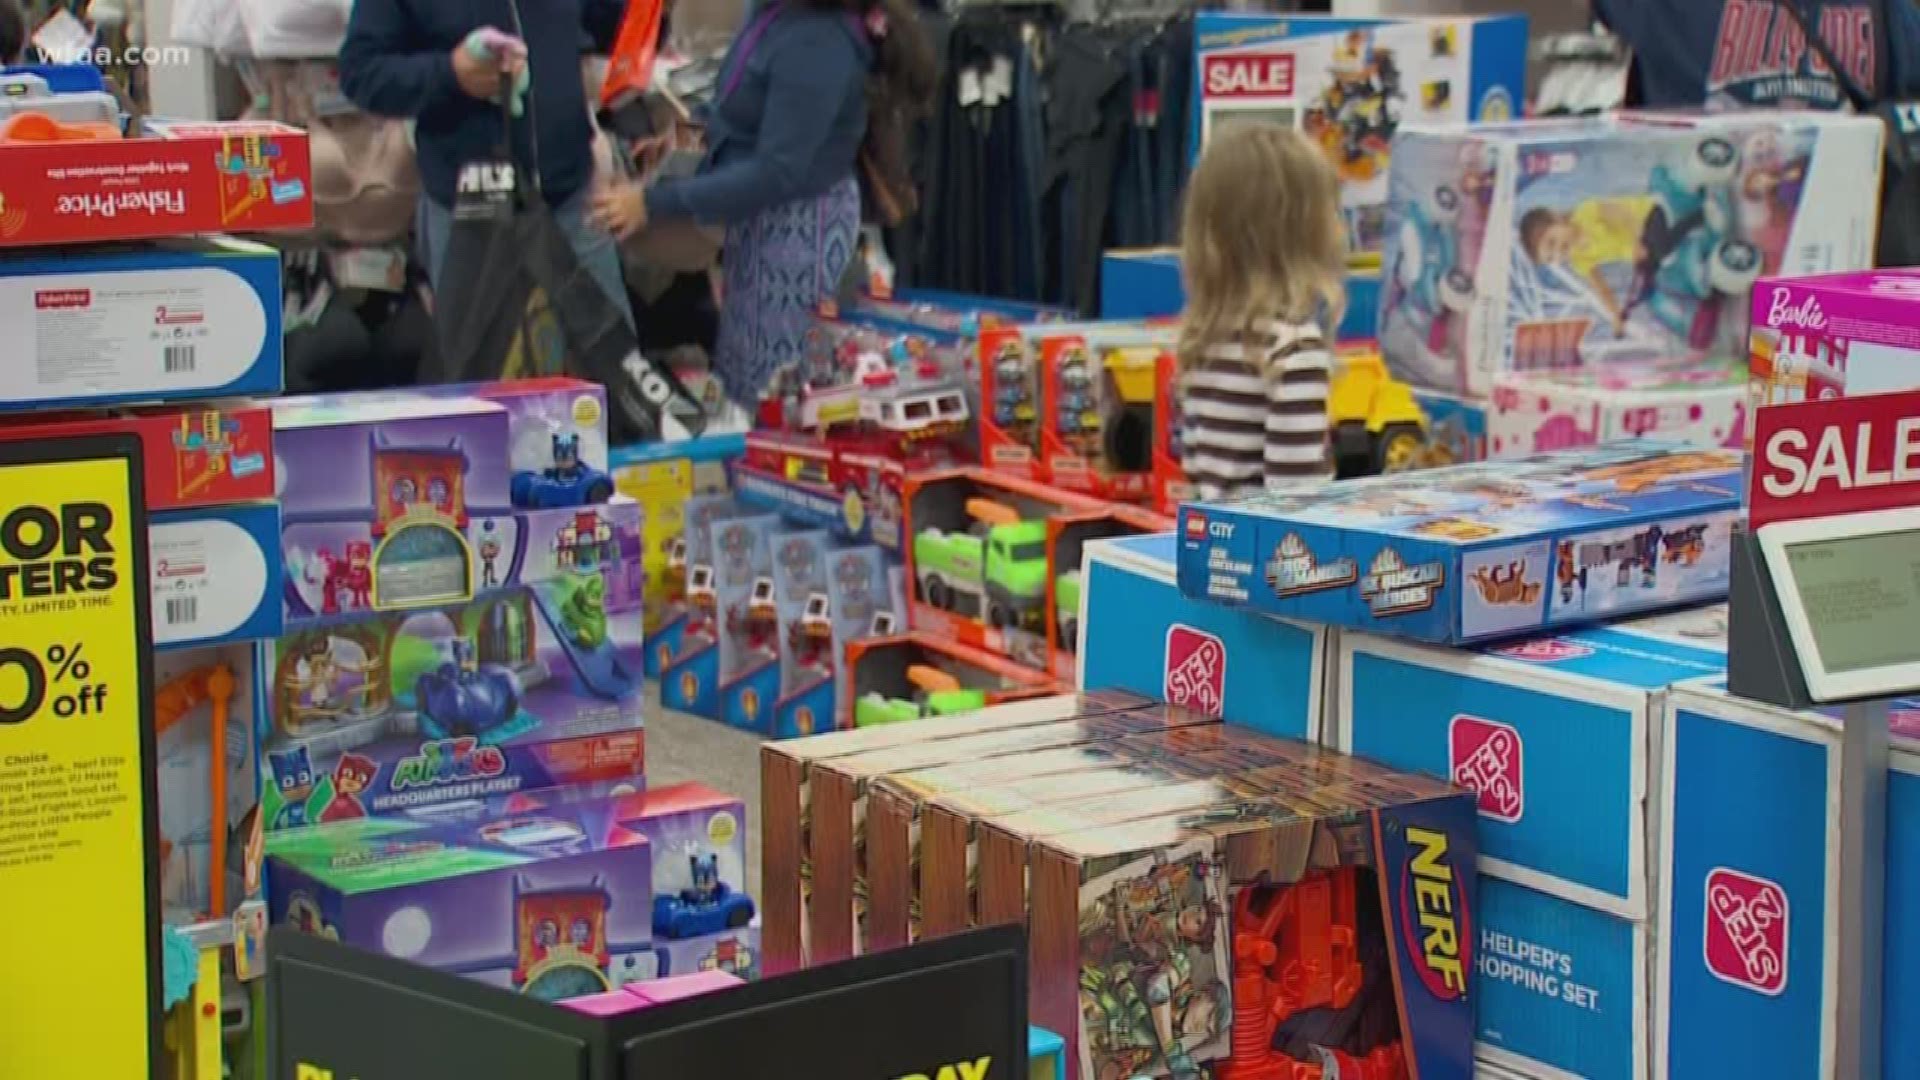 "We want to get that TV": Heavily marked down electronics, only available in-store, will keep crowds heading to many big-box retailers this holiday shopping season.